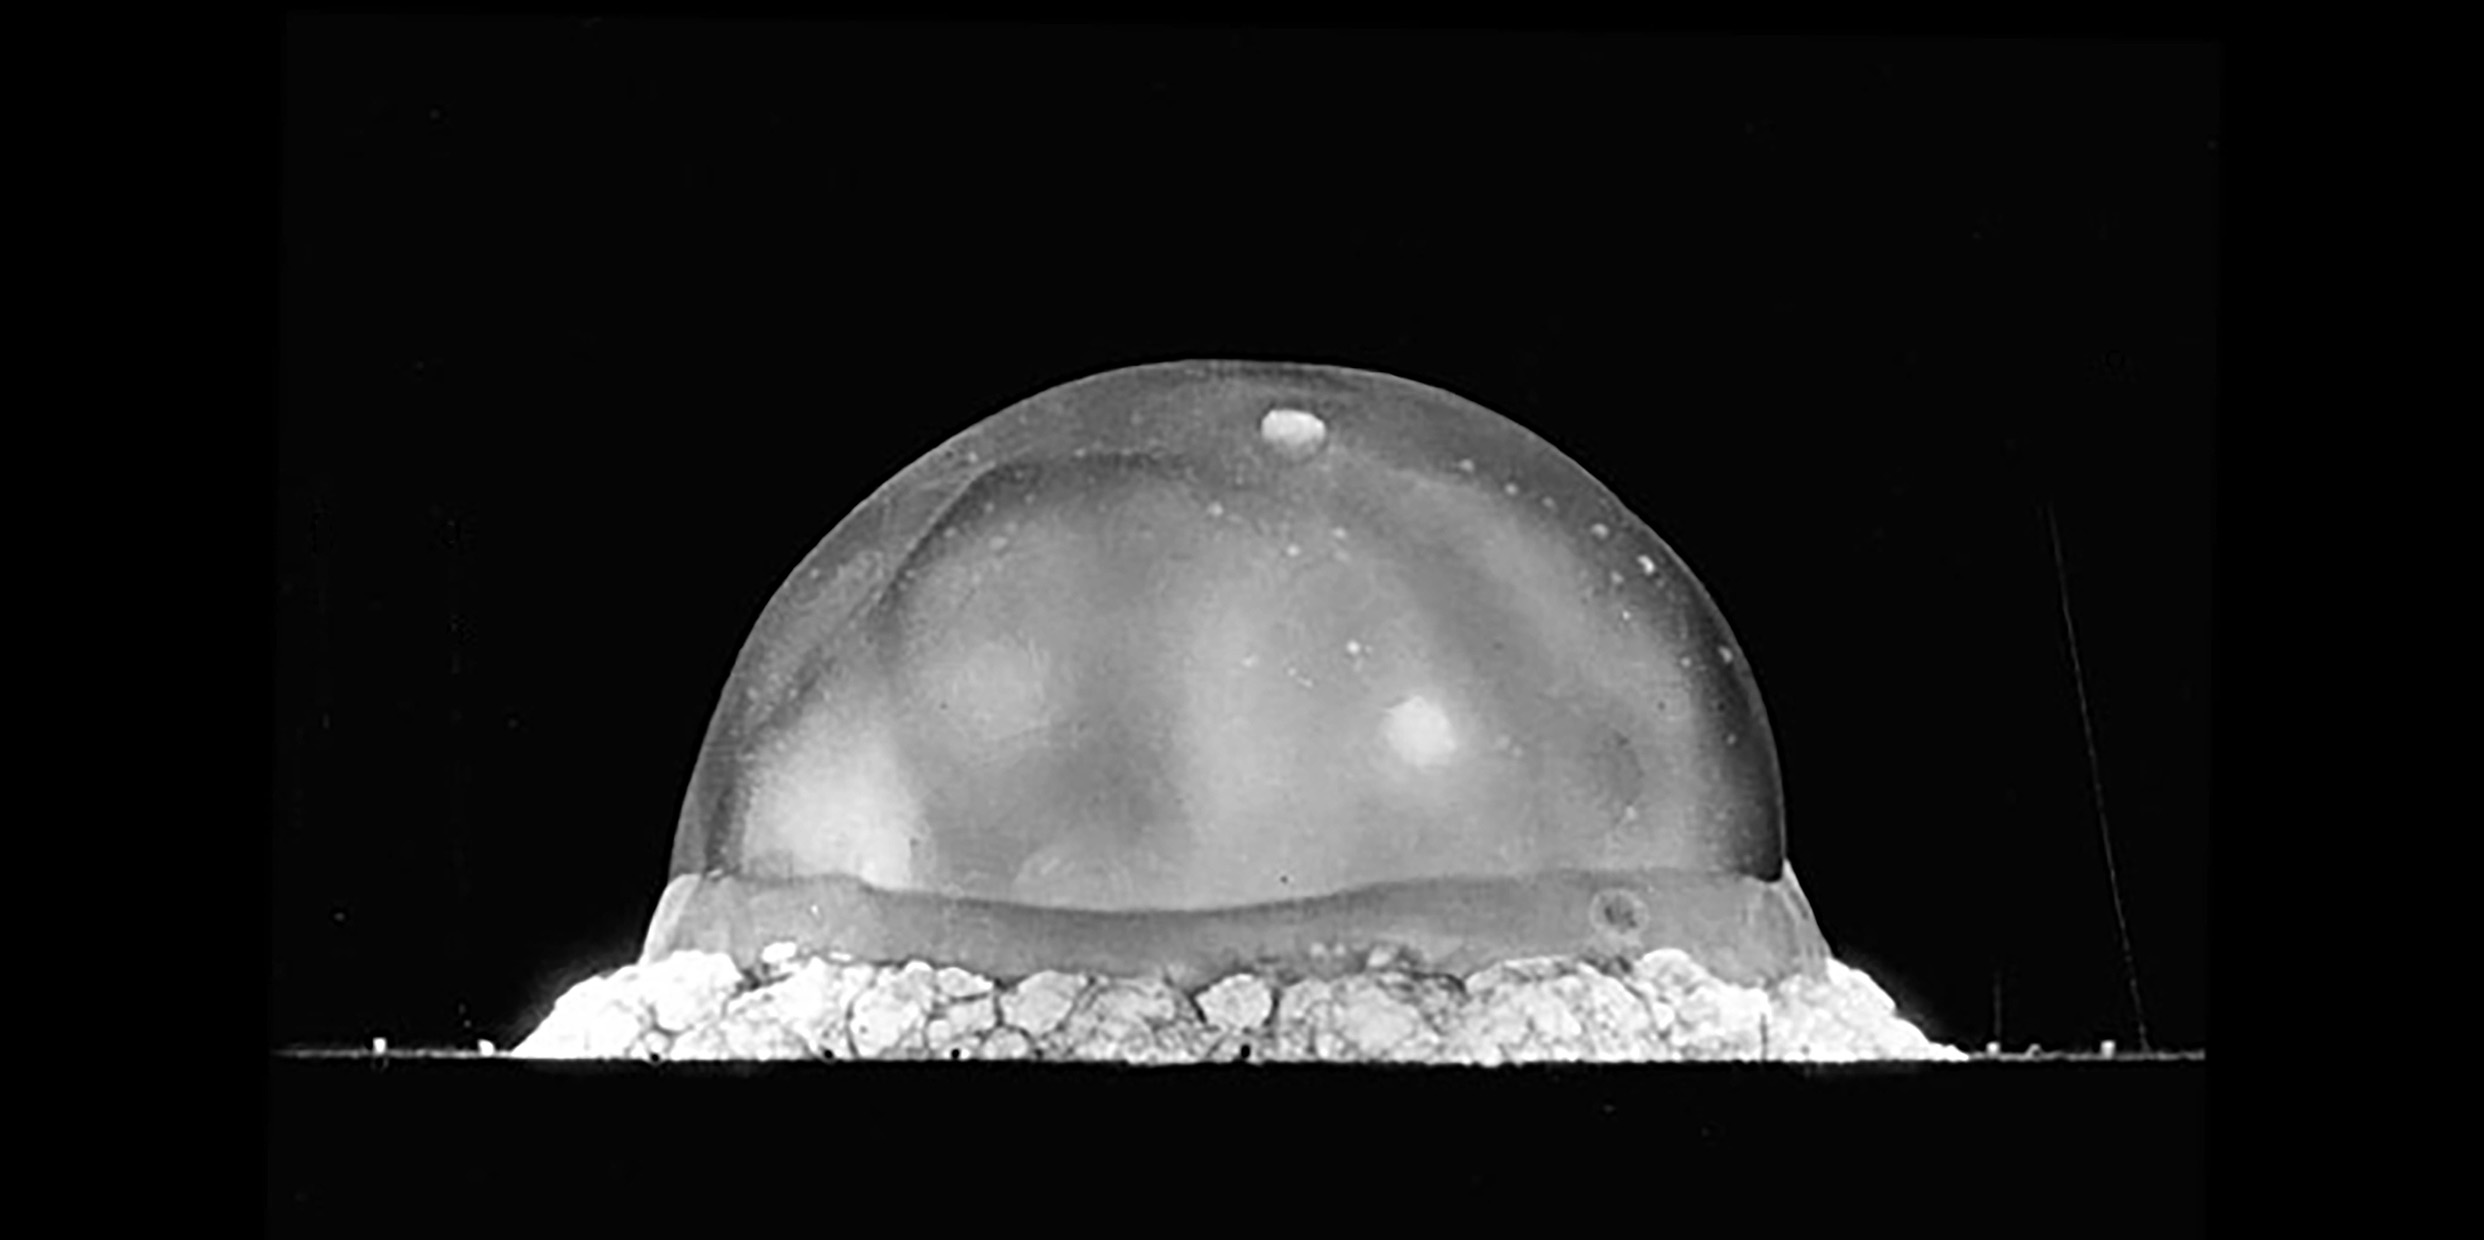 Image of a nuclear fireball